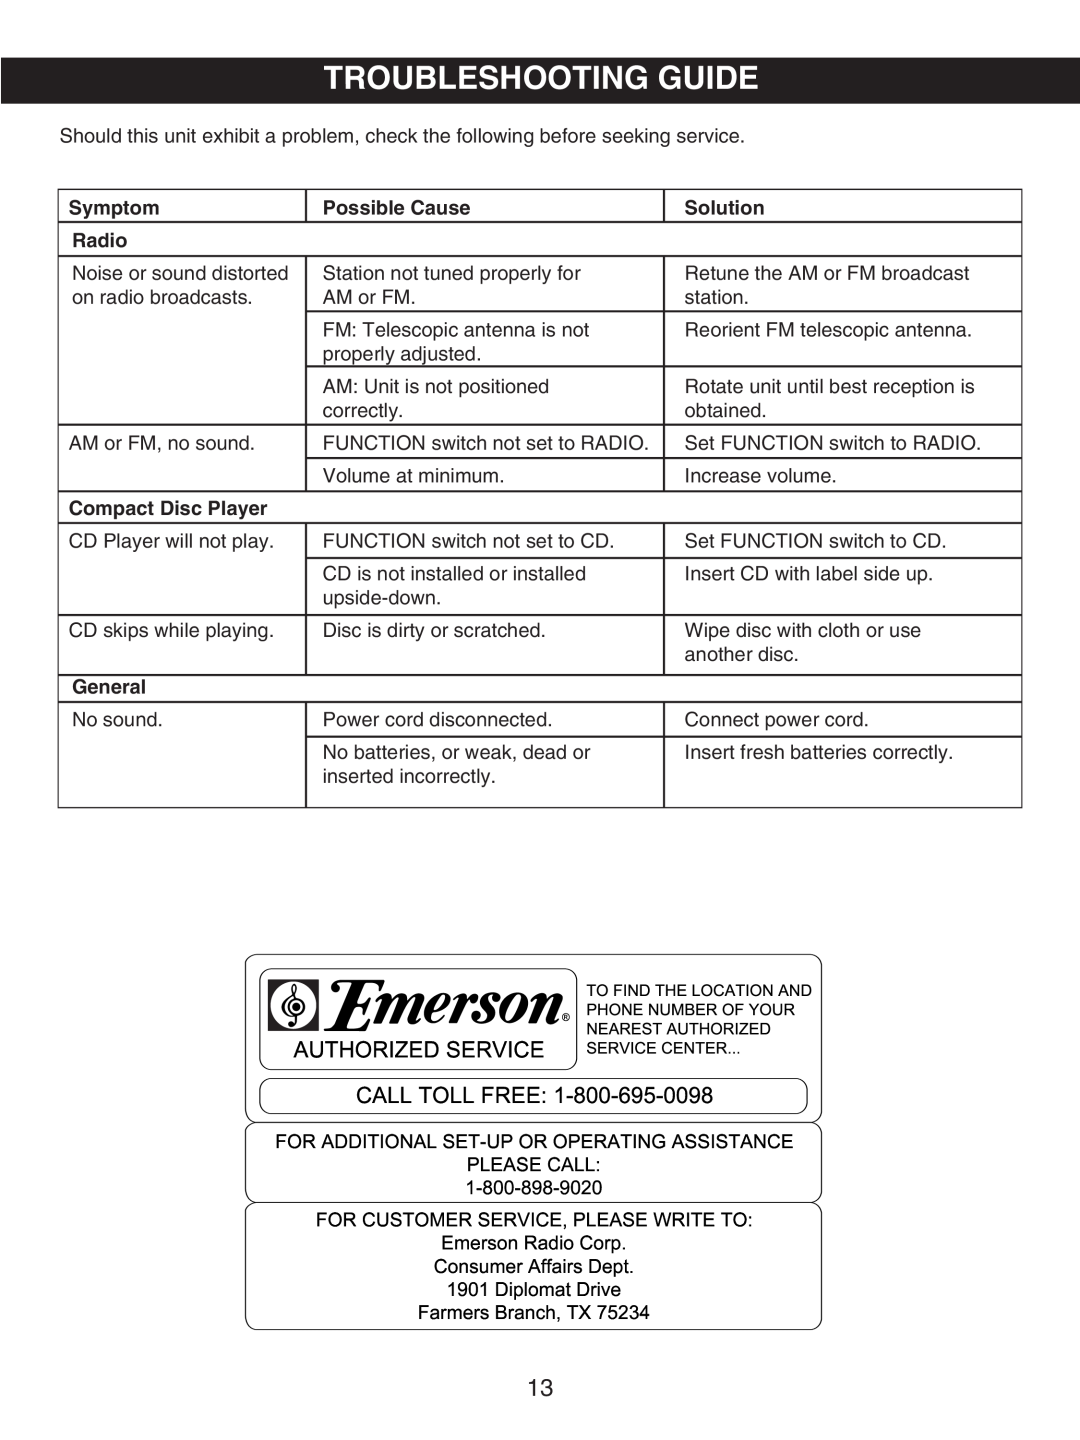 Emerson SB231 Troubleshooting Guide, Authorized Service Service Center, Call Toll Free, Symptom, Possible Cause, Solution 